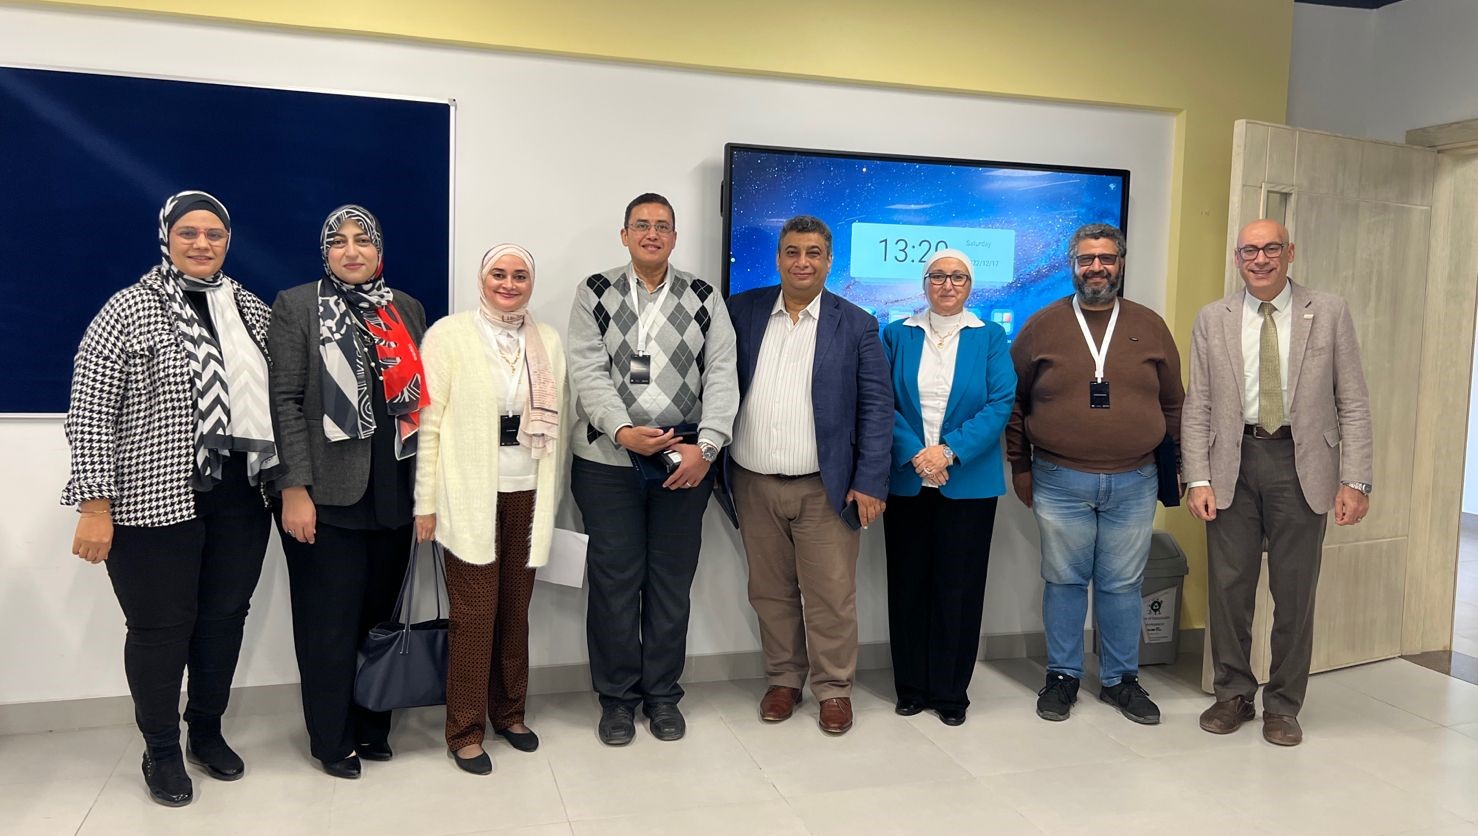 Prof. Ahmed Madian and Dr. Lobna A. Said have participated in the OPET 